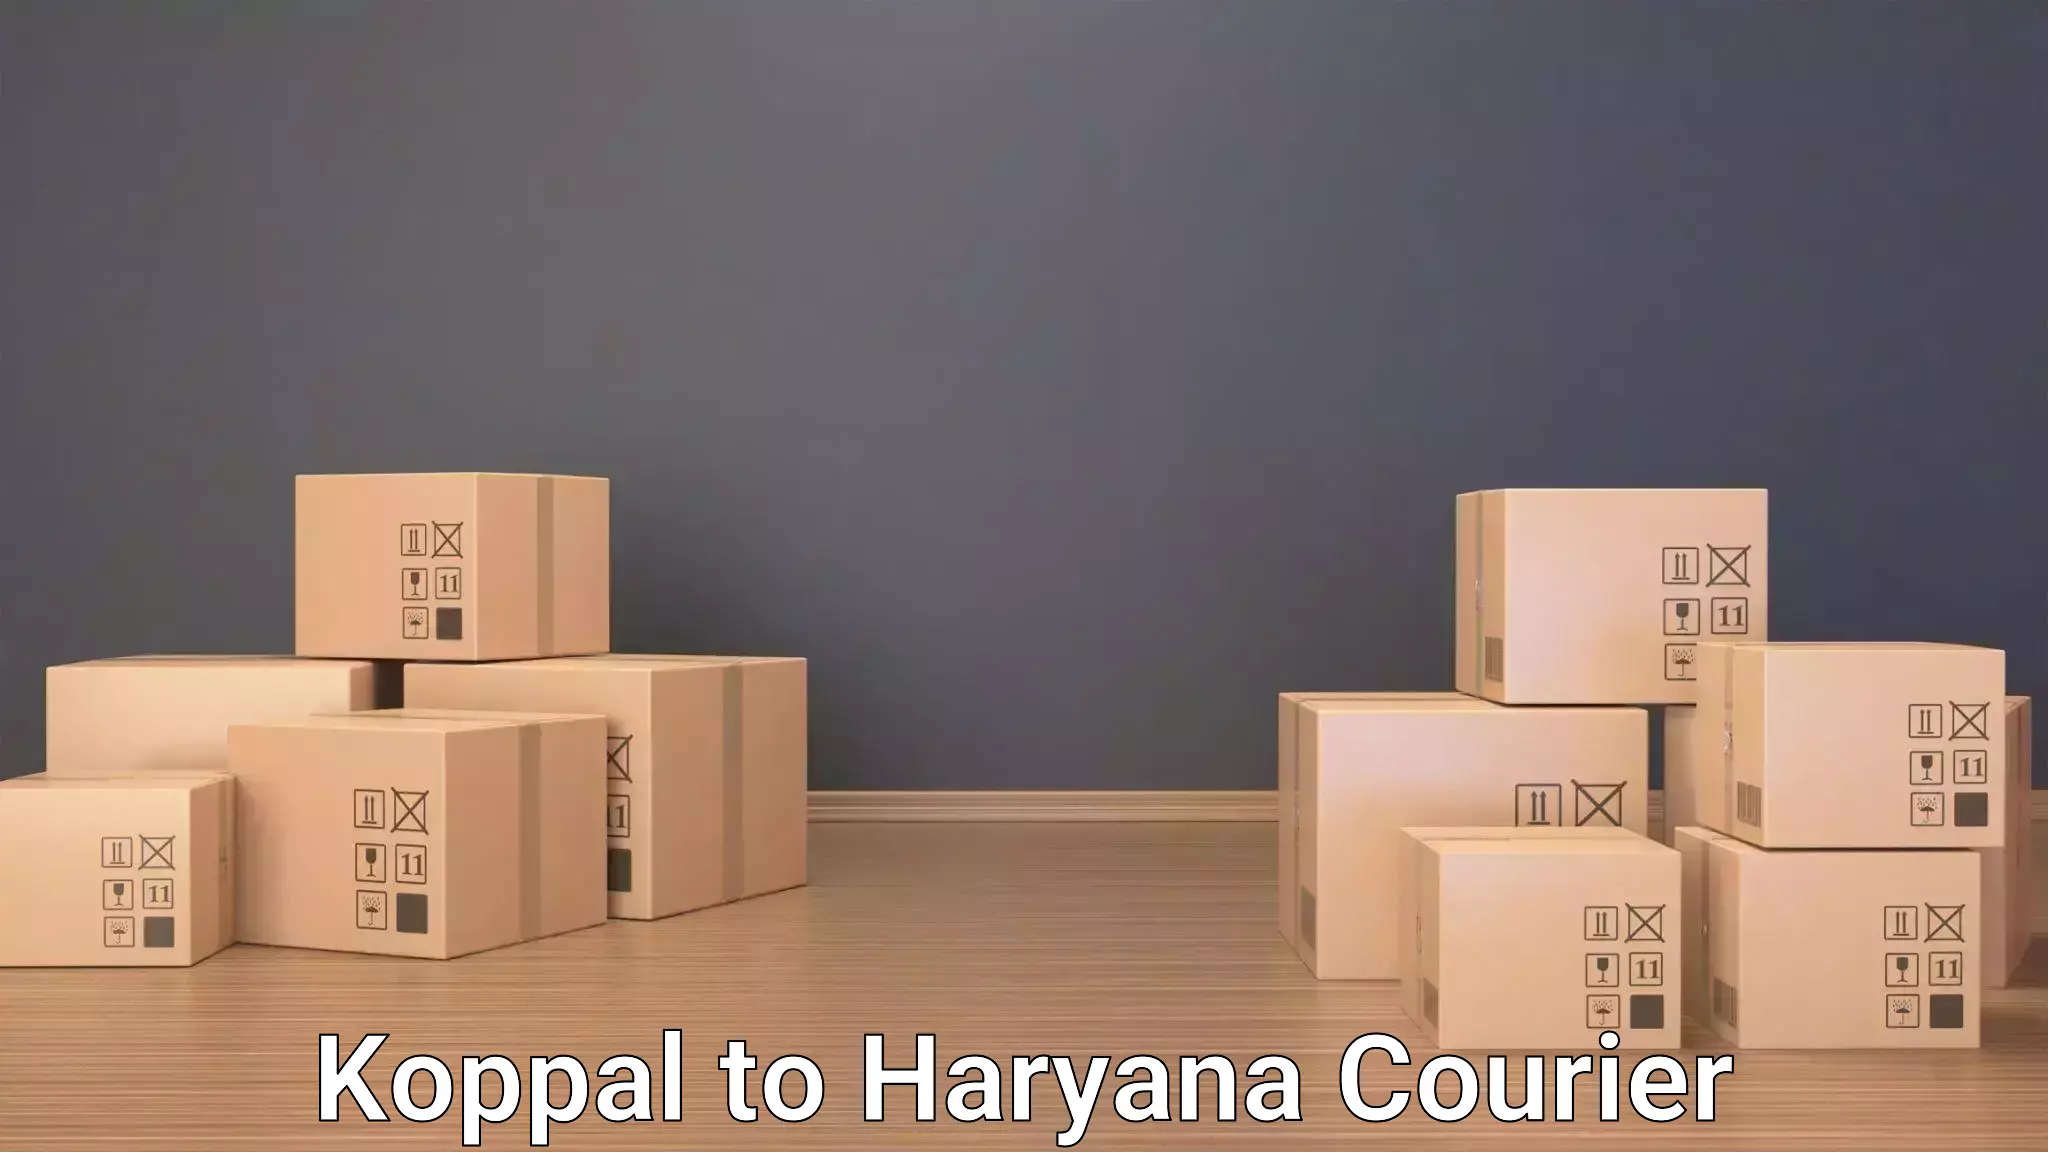 Luggage delivery estimate in Koppal to NCR Haryana